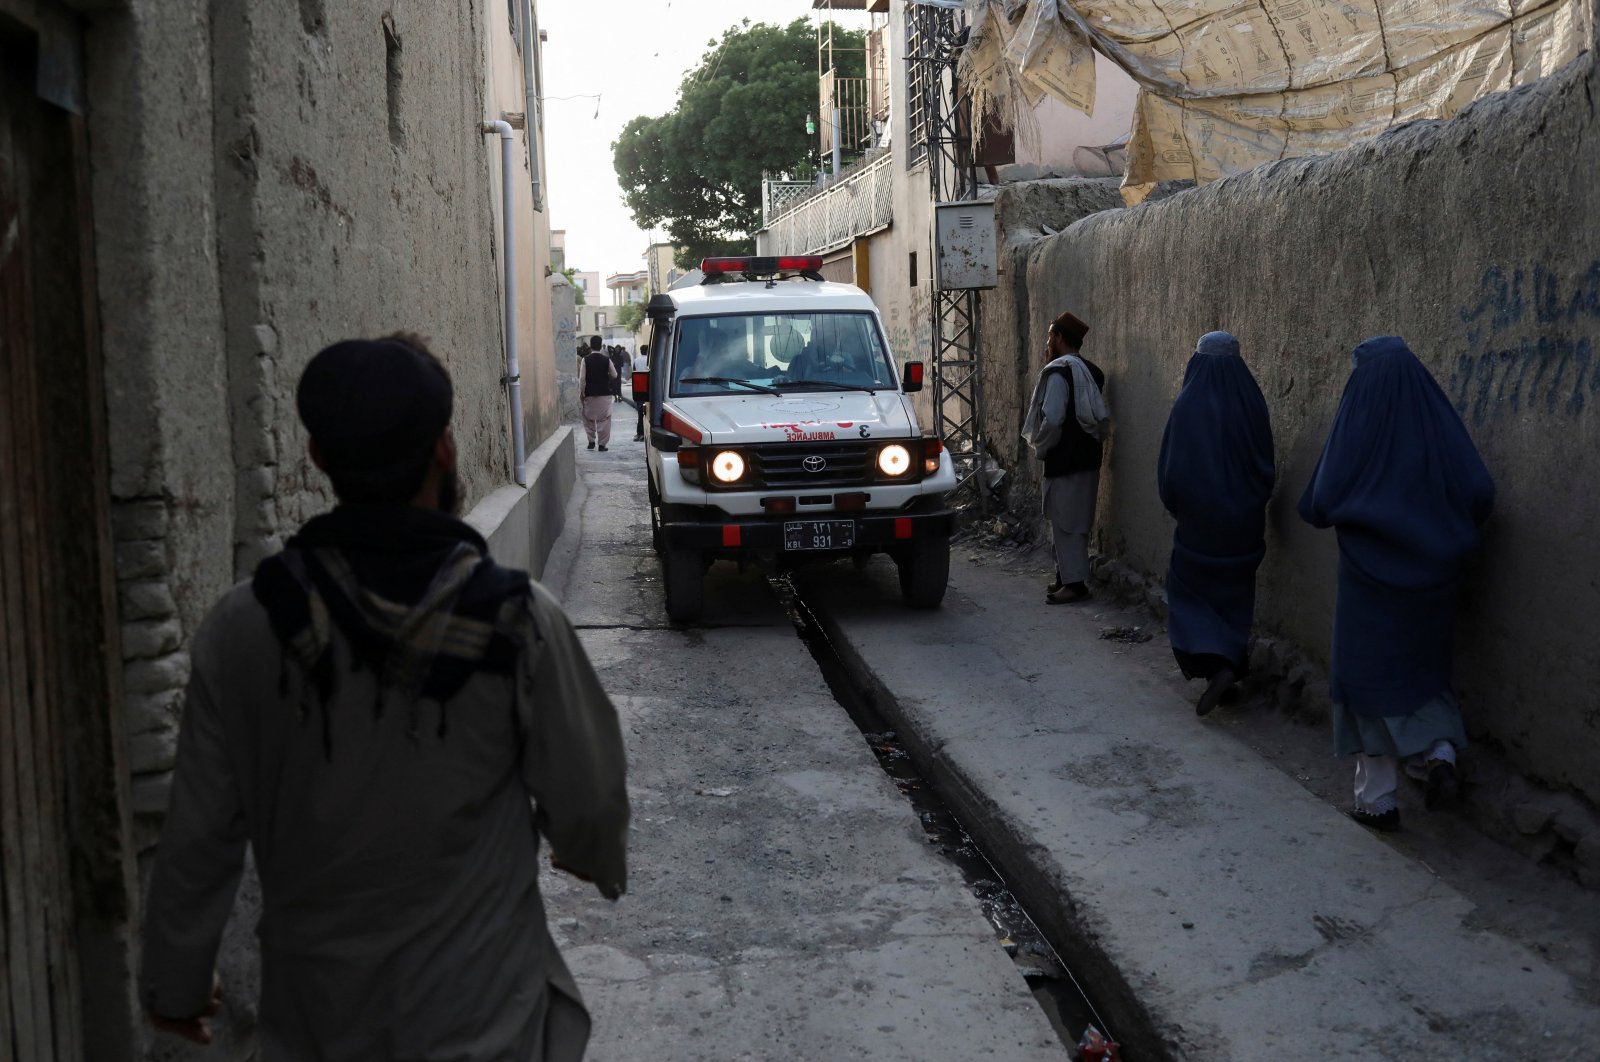 An ambulance is seen near the site of an explosion at the Khalifa Aga Gul Jan Mosque, Kabul, Afghanistan, April 29, 2022. (Reuters Photo)